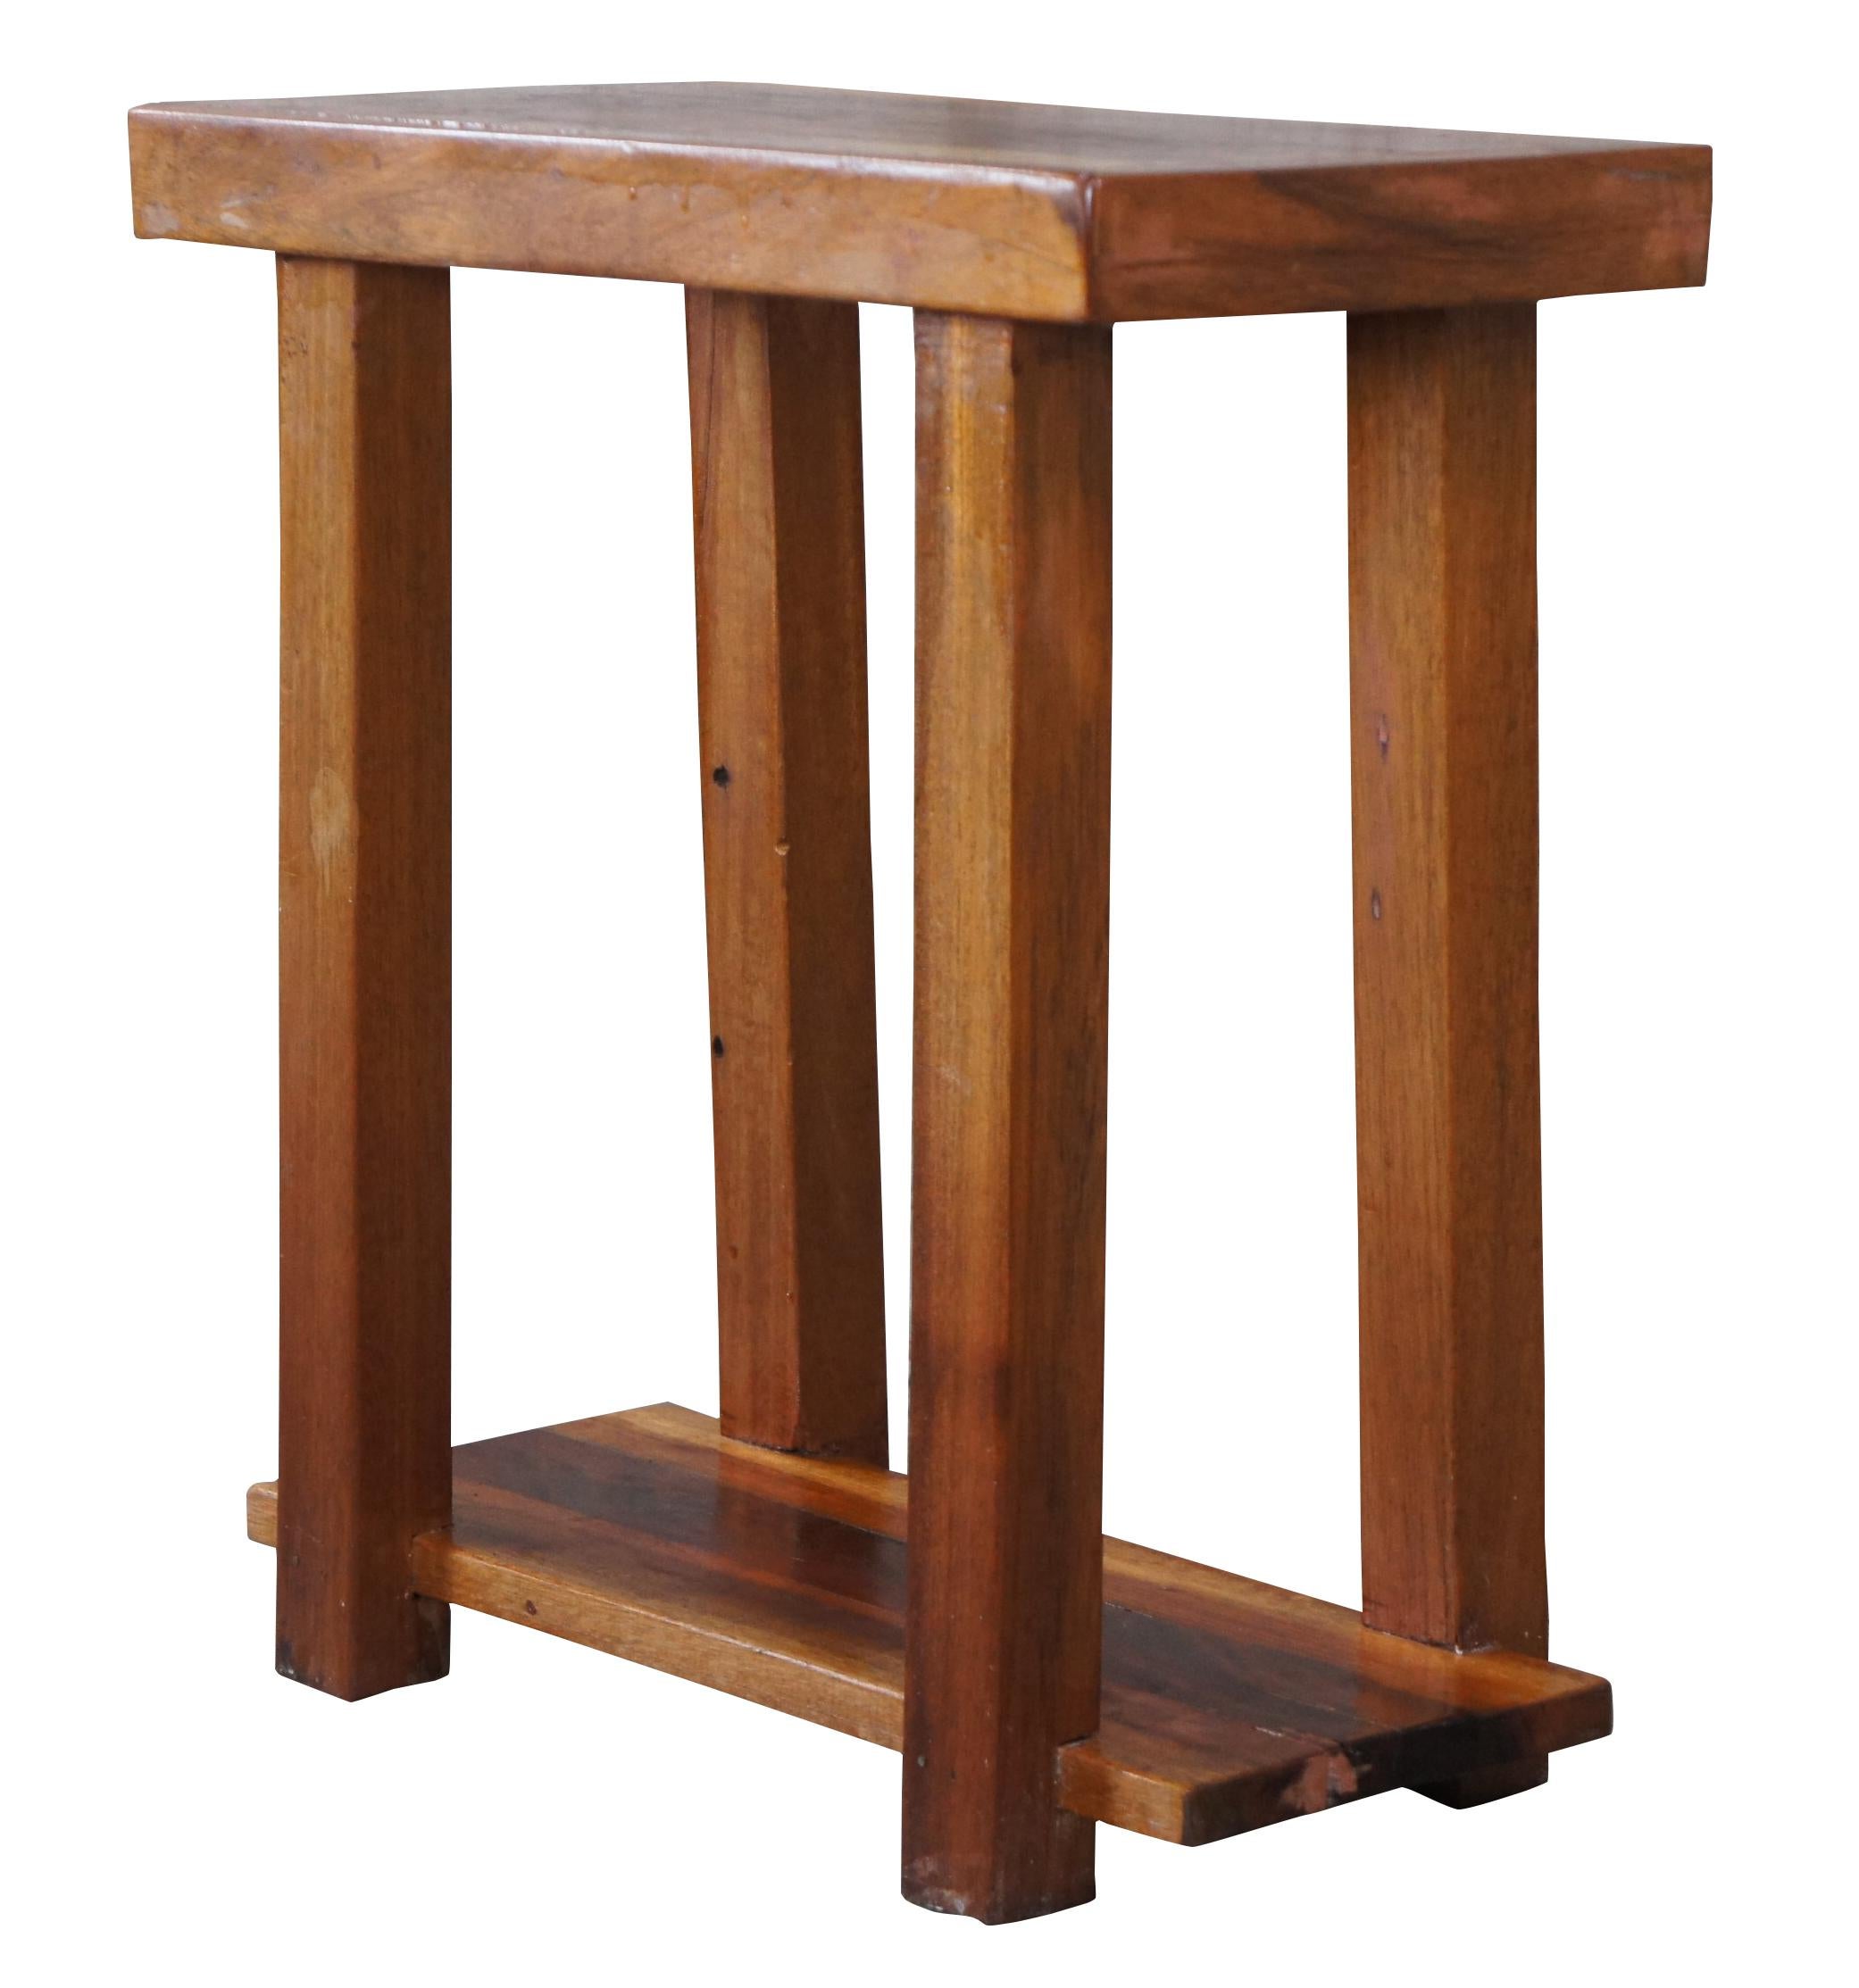 Vintage arts and crafts side table. Made of pine, featuring rectangular form with two tiers connecting square legs. Measure: 20